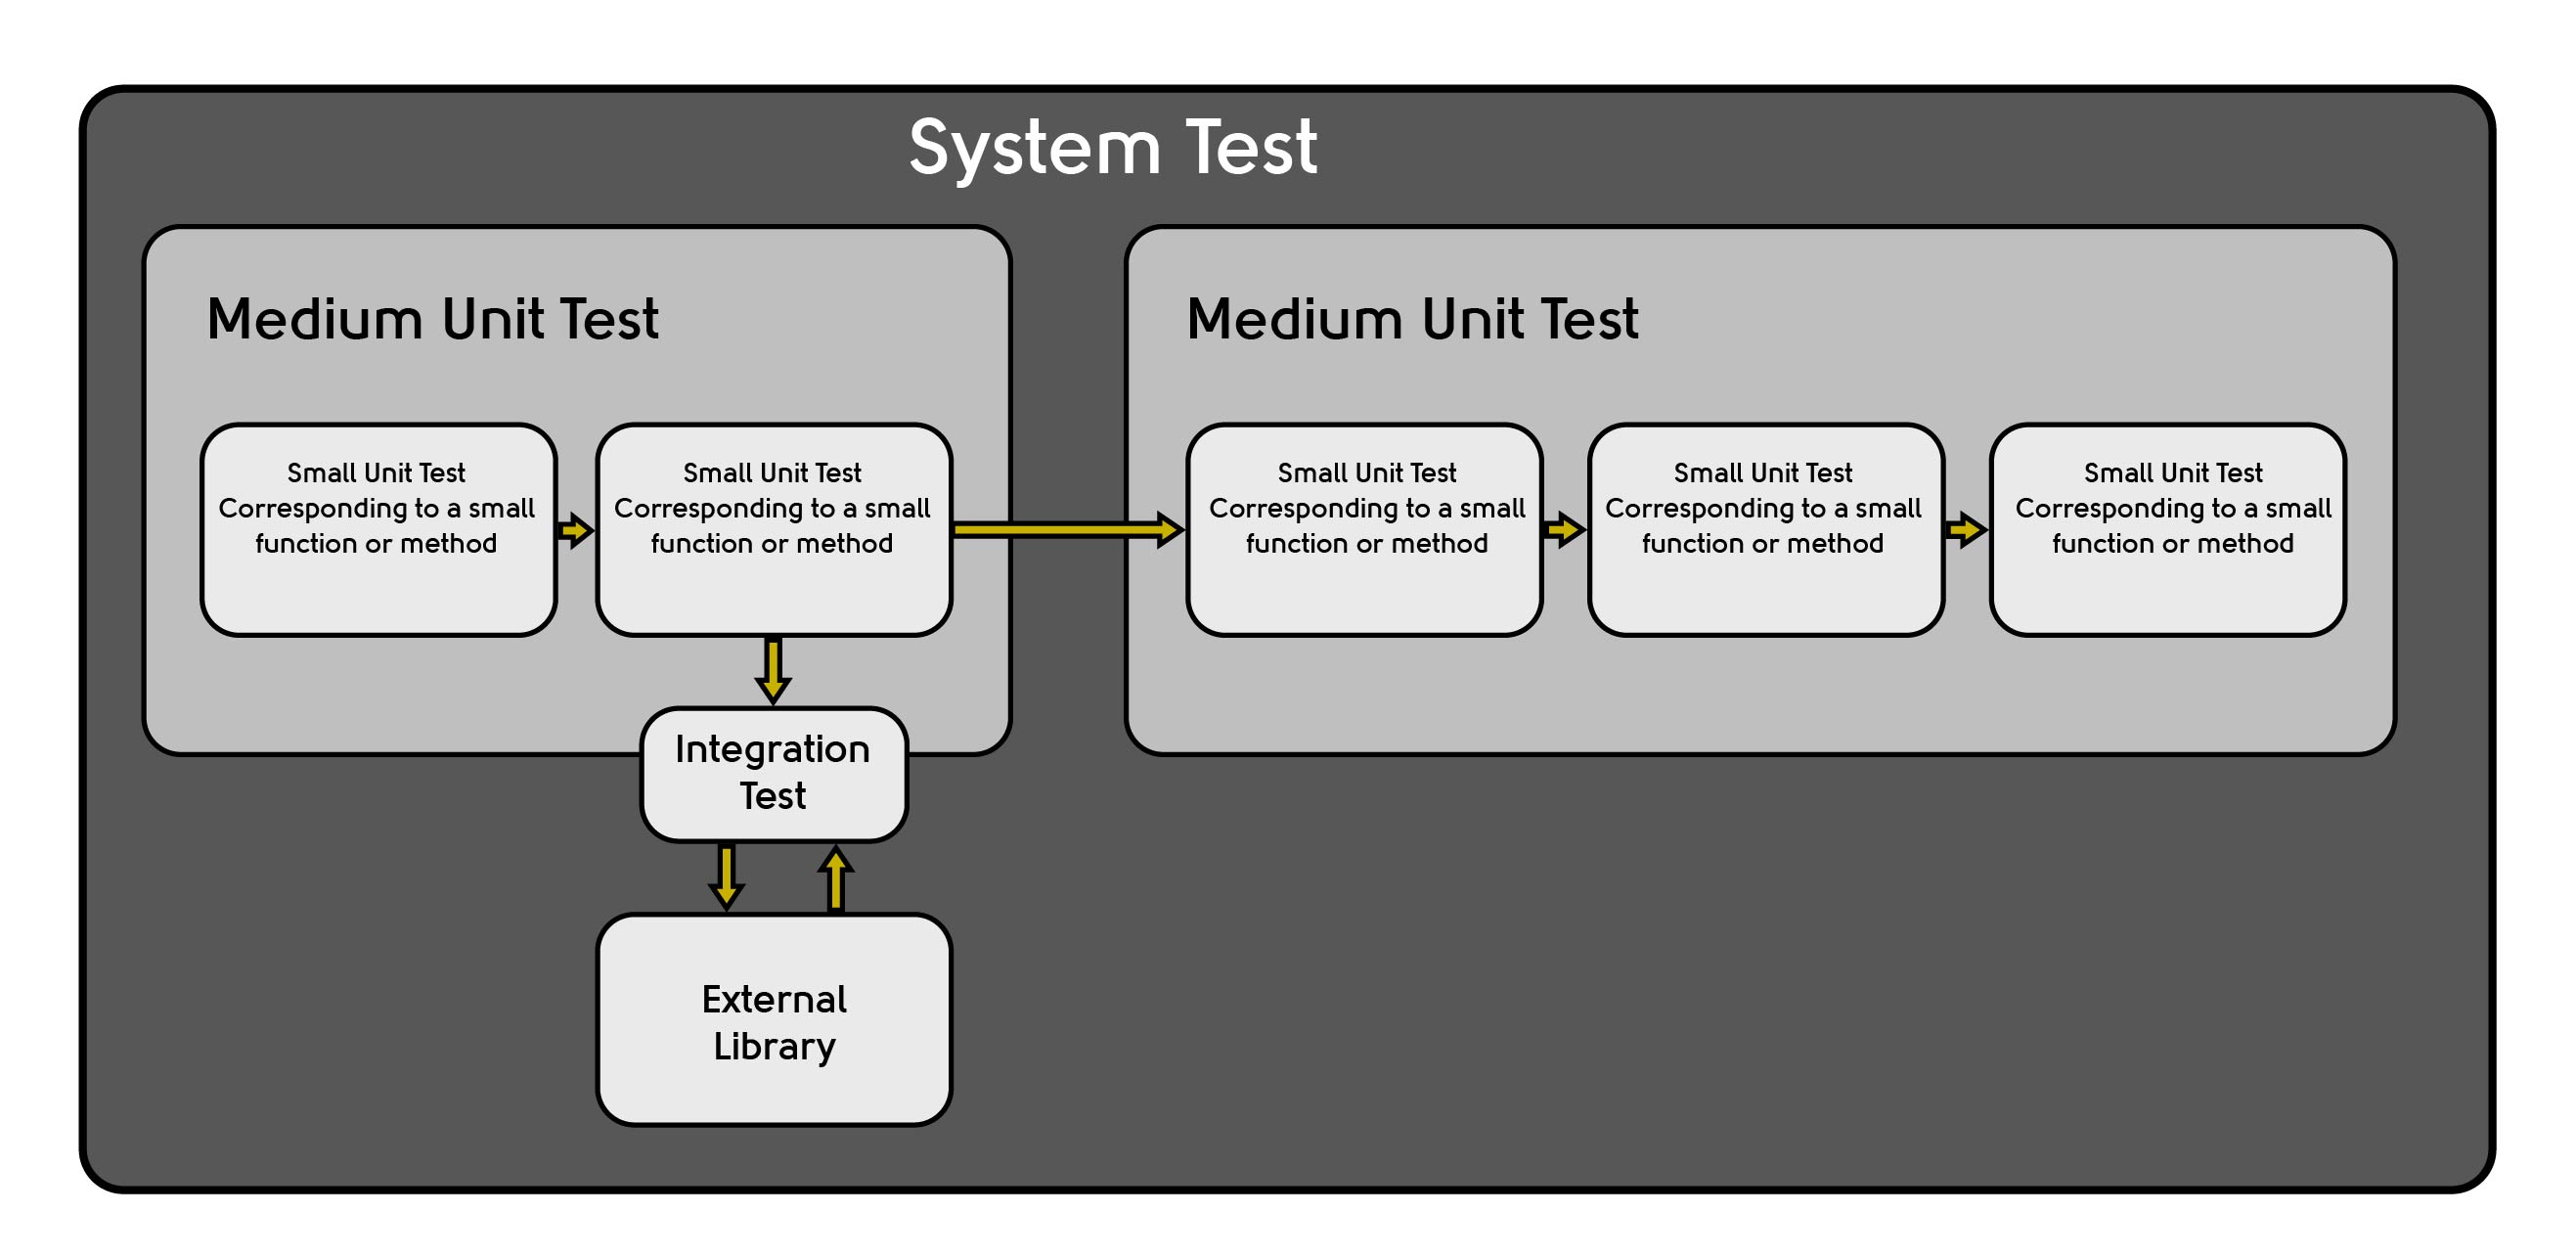 Layered Tests. All tests are contained within the system test. Which contians medium unit tests. One medium tests also has an adjacent integration test. Within the medium tests are smaller unit tests.